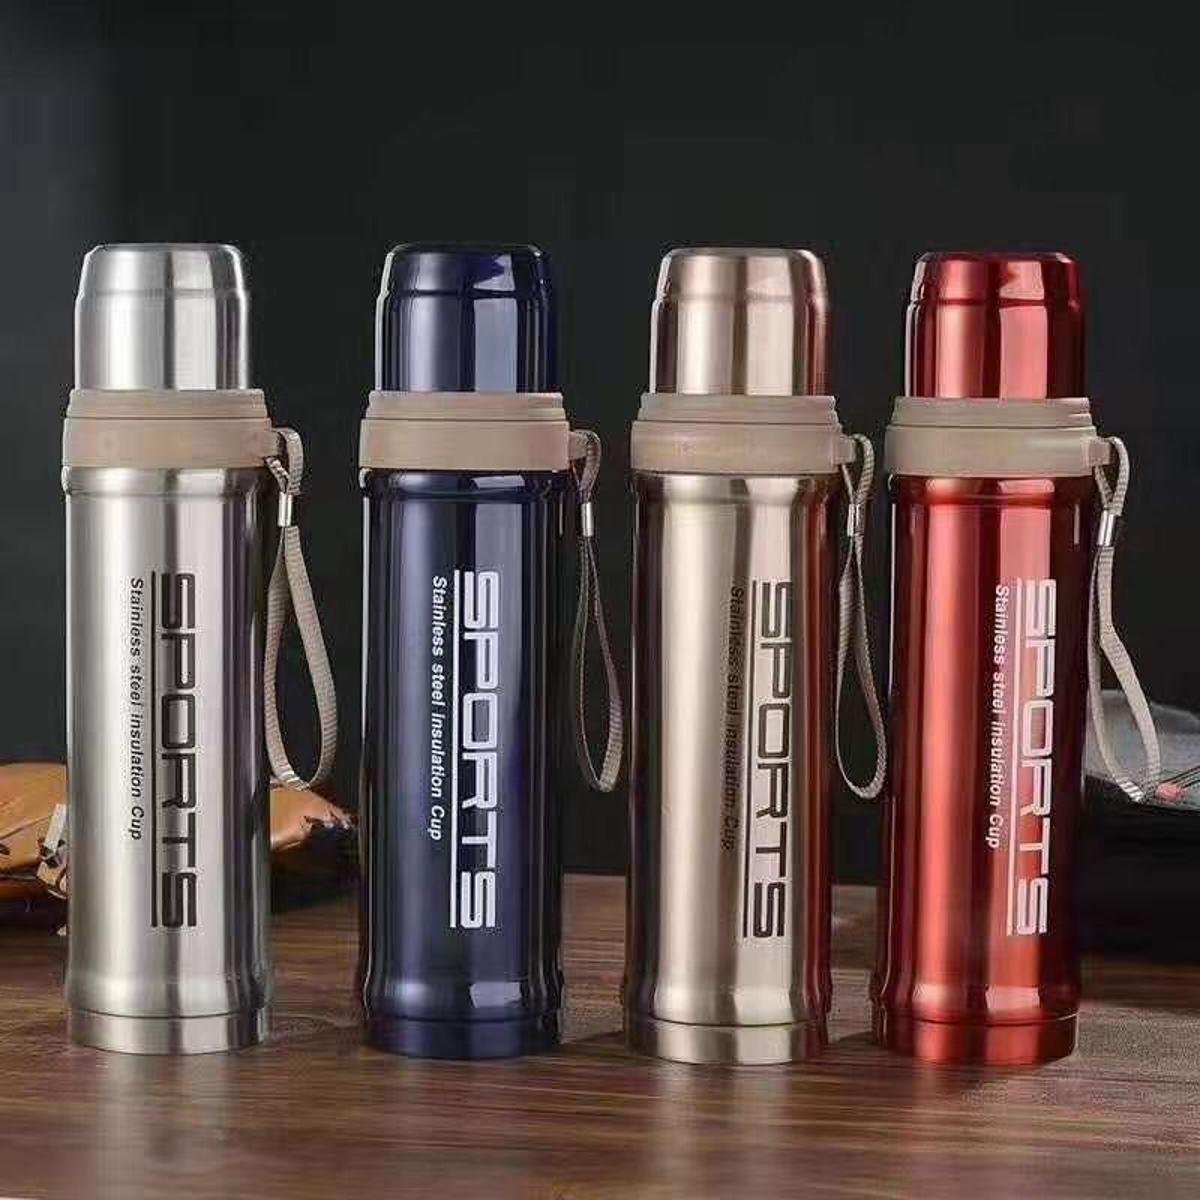 Koodee Heat Resistant Stainless Steel Water Bottle Keeping Drink Hot/ Cold  - China Wholesale and Stainless Steel price